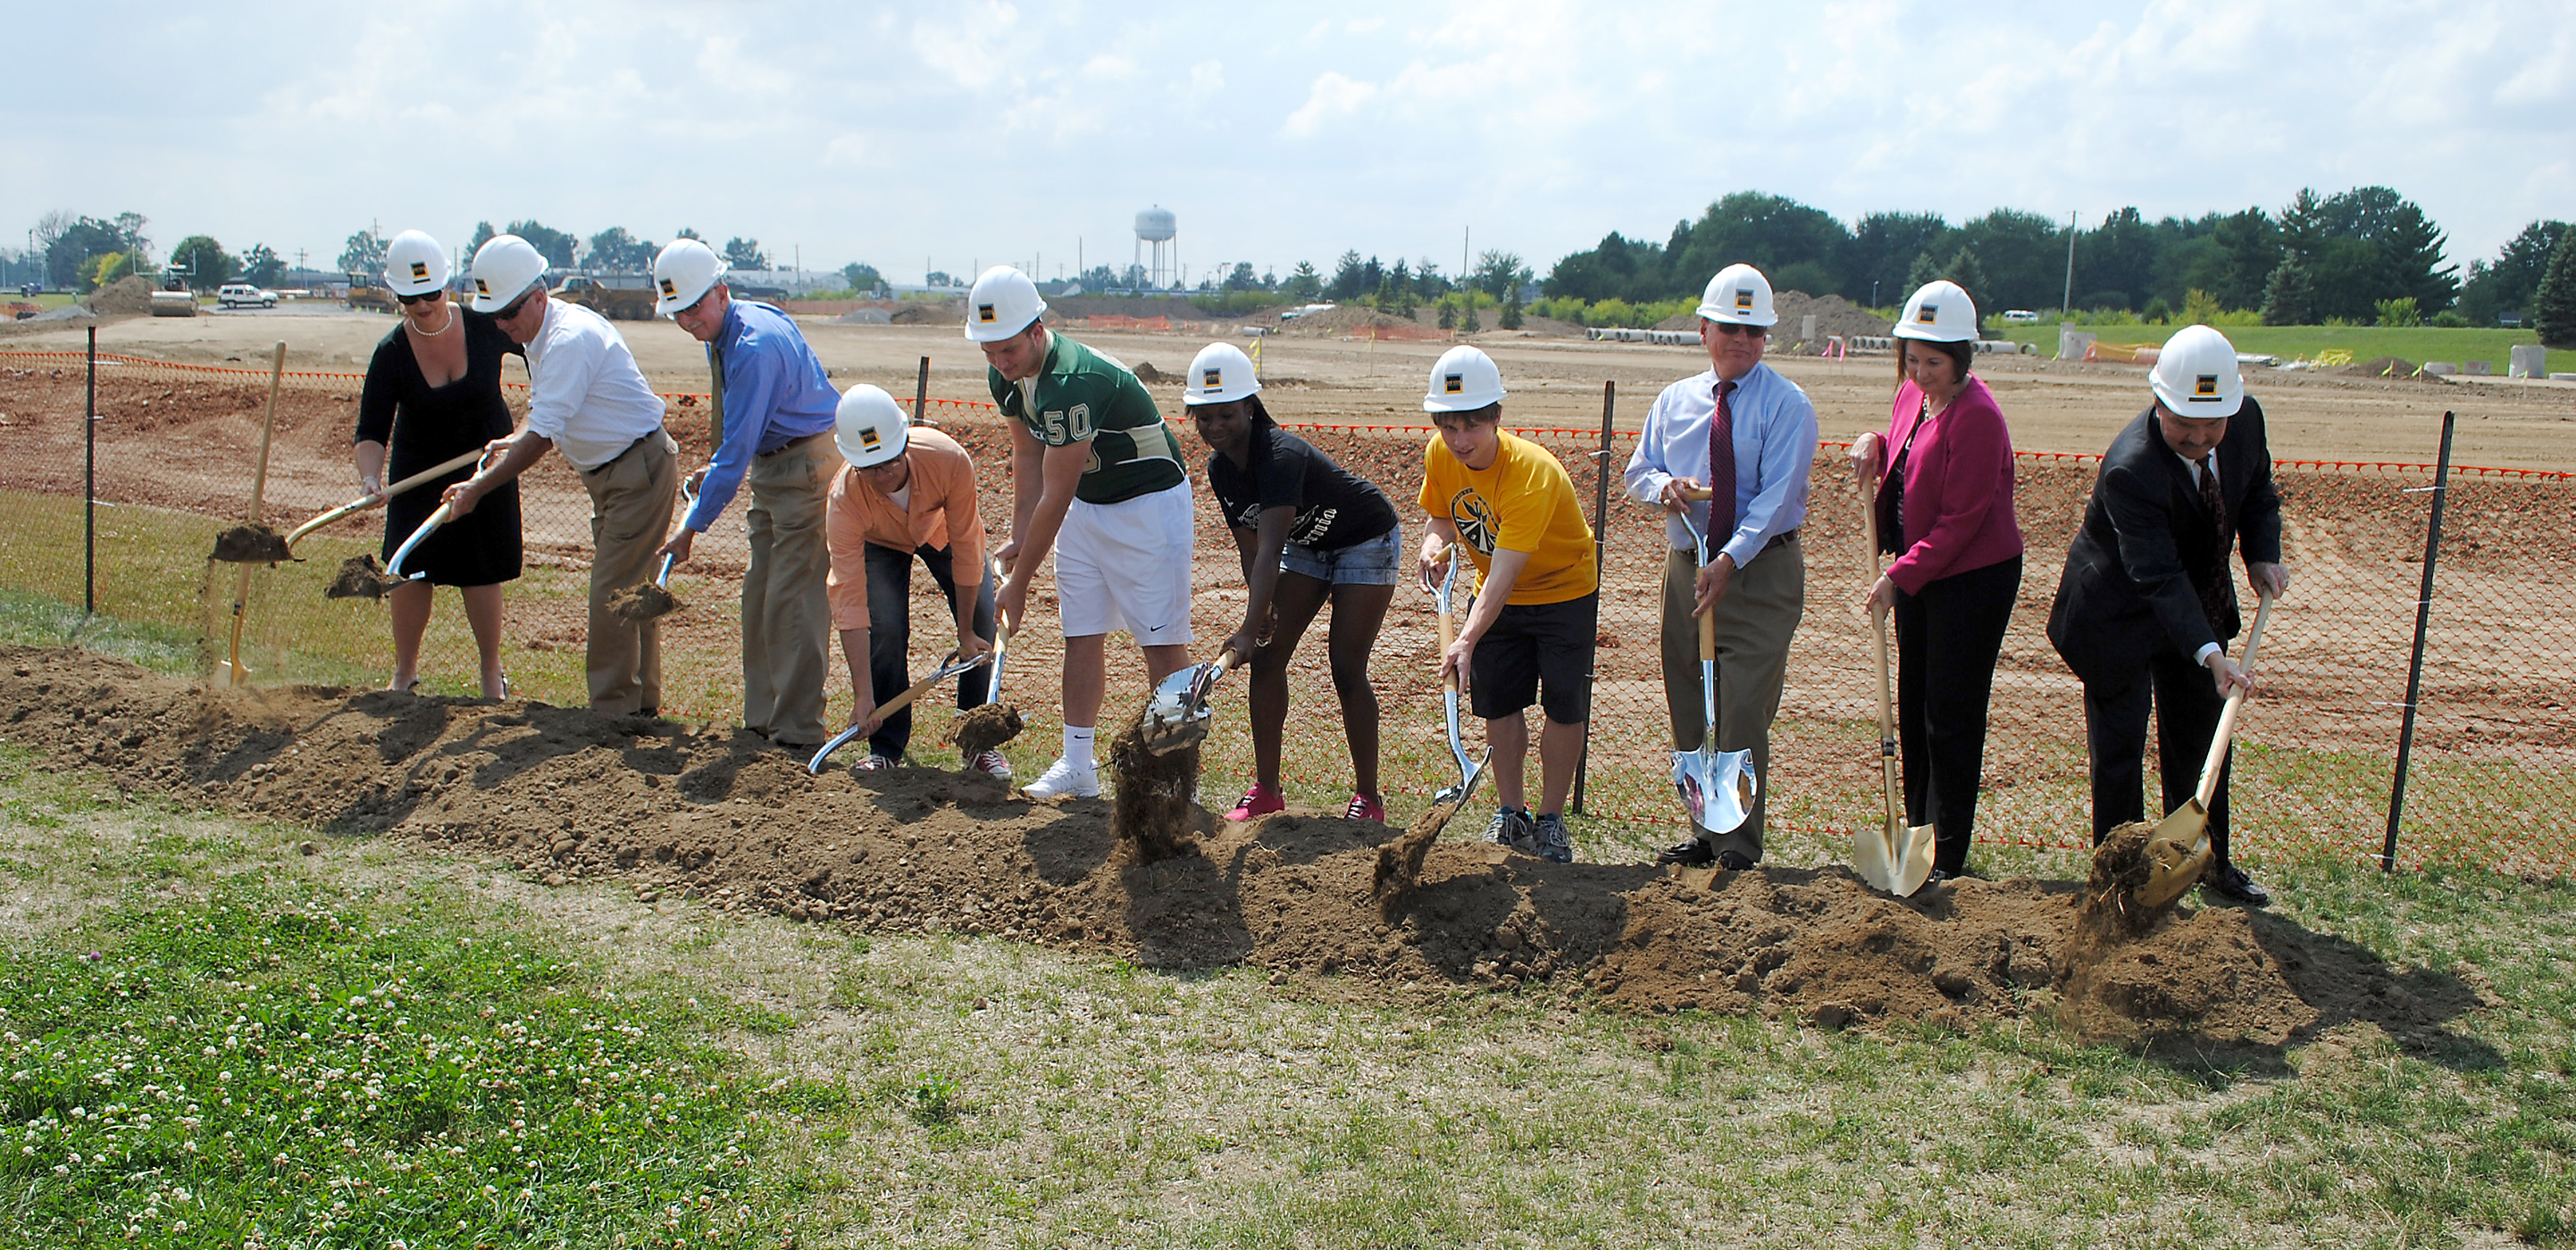 From left: Westfield High School Principal Dr. Stacy McGuire, Mayor Andy Cook, Westfield Washington Schools Supt. Dr. Mark Keen, WHS students Aaron Smith, Ryan Pape, Karen Hubbard and Johnny Crawford, Westfield City Council President Jim Ake, Riverview Health Chief Financial Officer Brenda Baker and Riverview Health COO Larry Christman break ground on the new community stadium Aug. 18. (Photo by Robert Herrington)